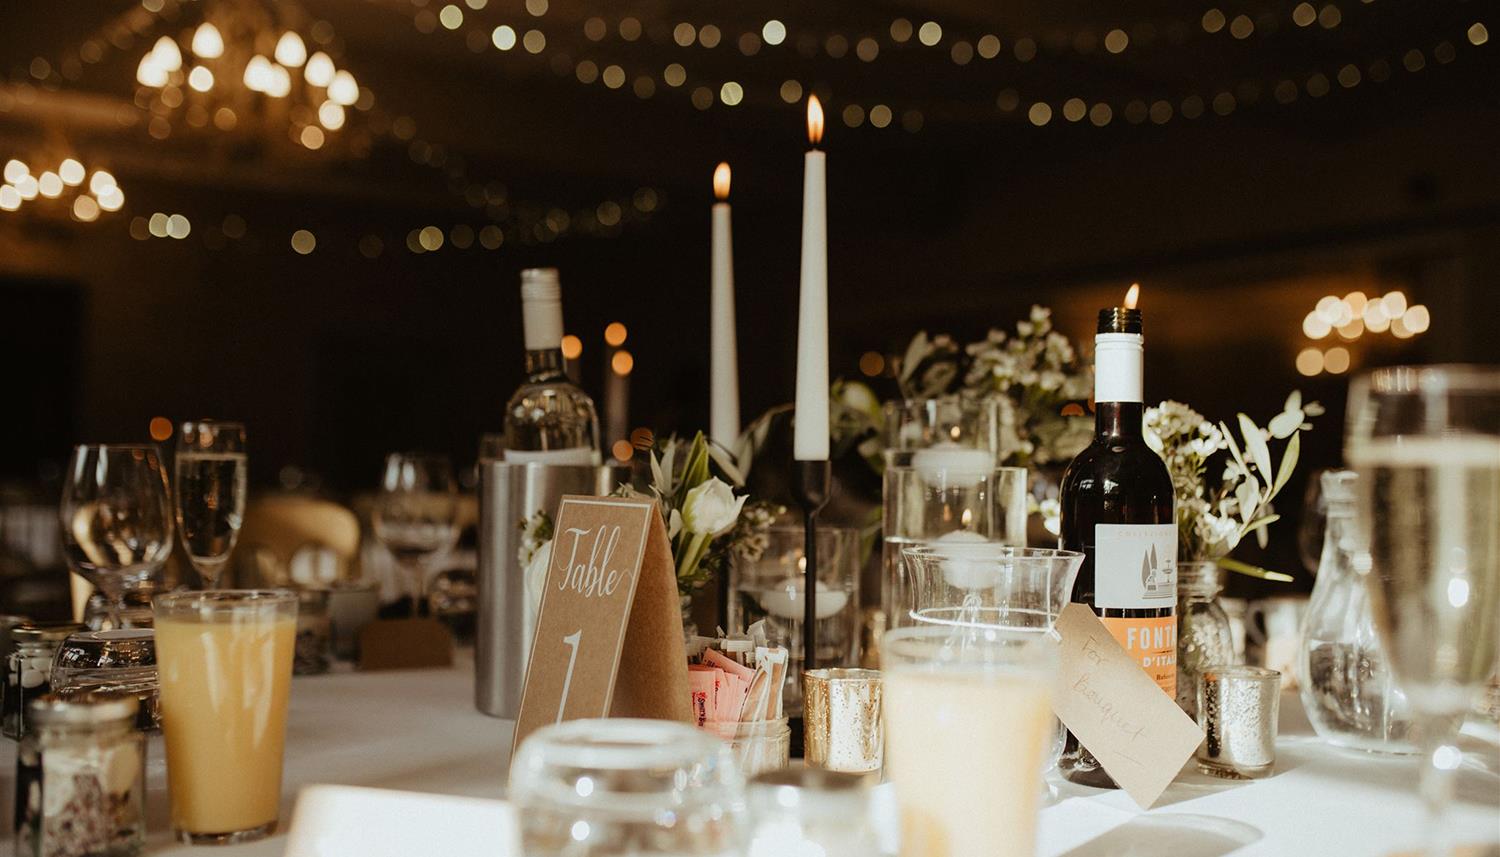 Candles on the table. Photo Credit: E&O Photography